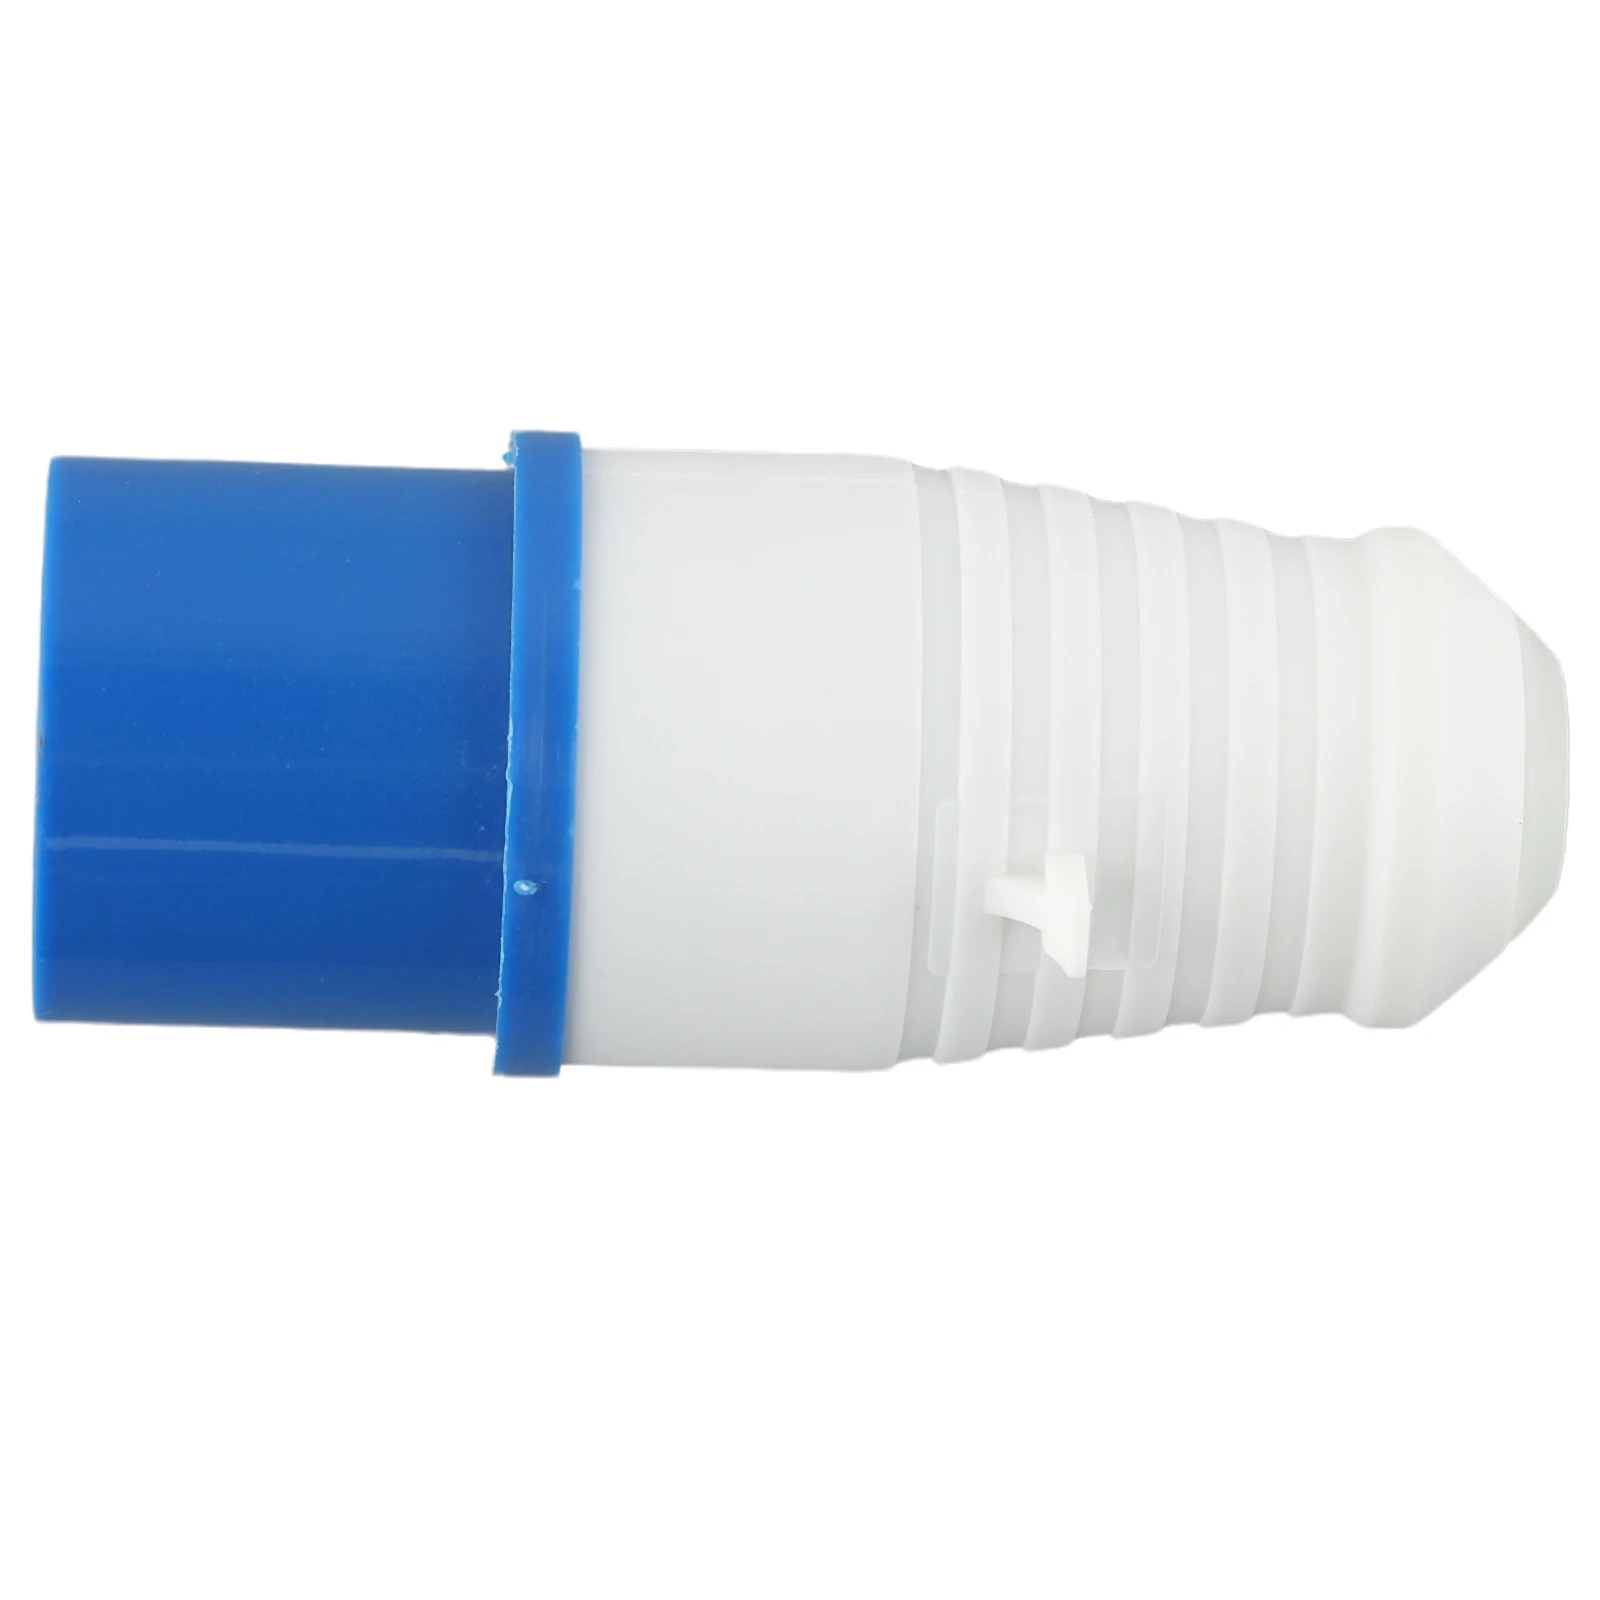 

Adapter Connection Plug 16A 240v ABS+Metal Blue And White Direct Mount Hook Up Site Adapter Mains Plug Practical